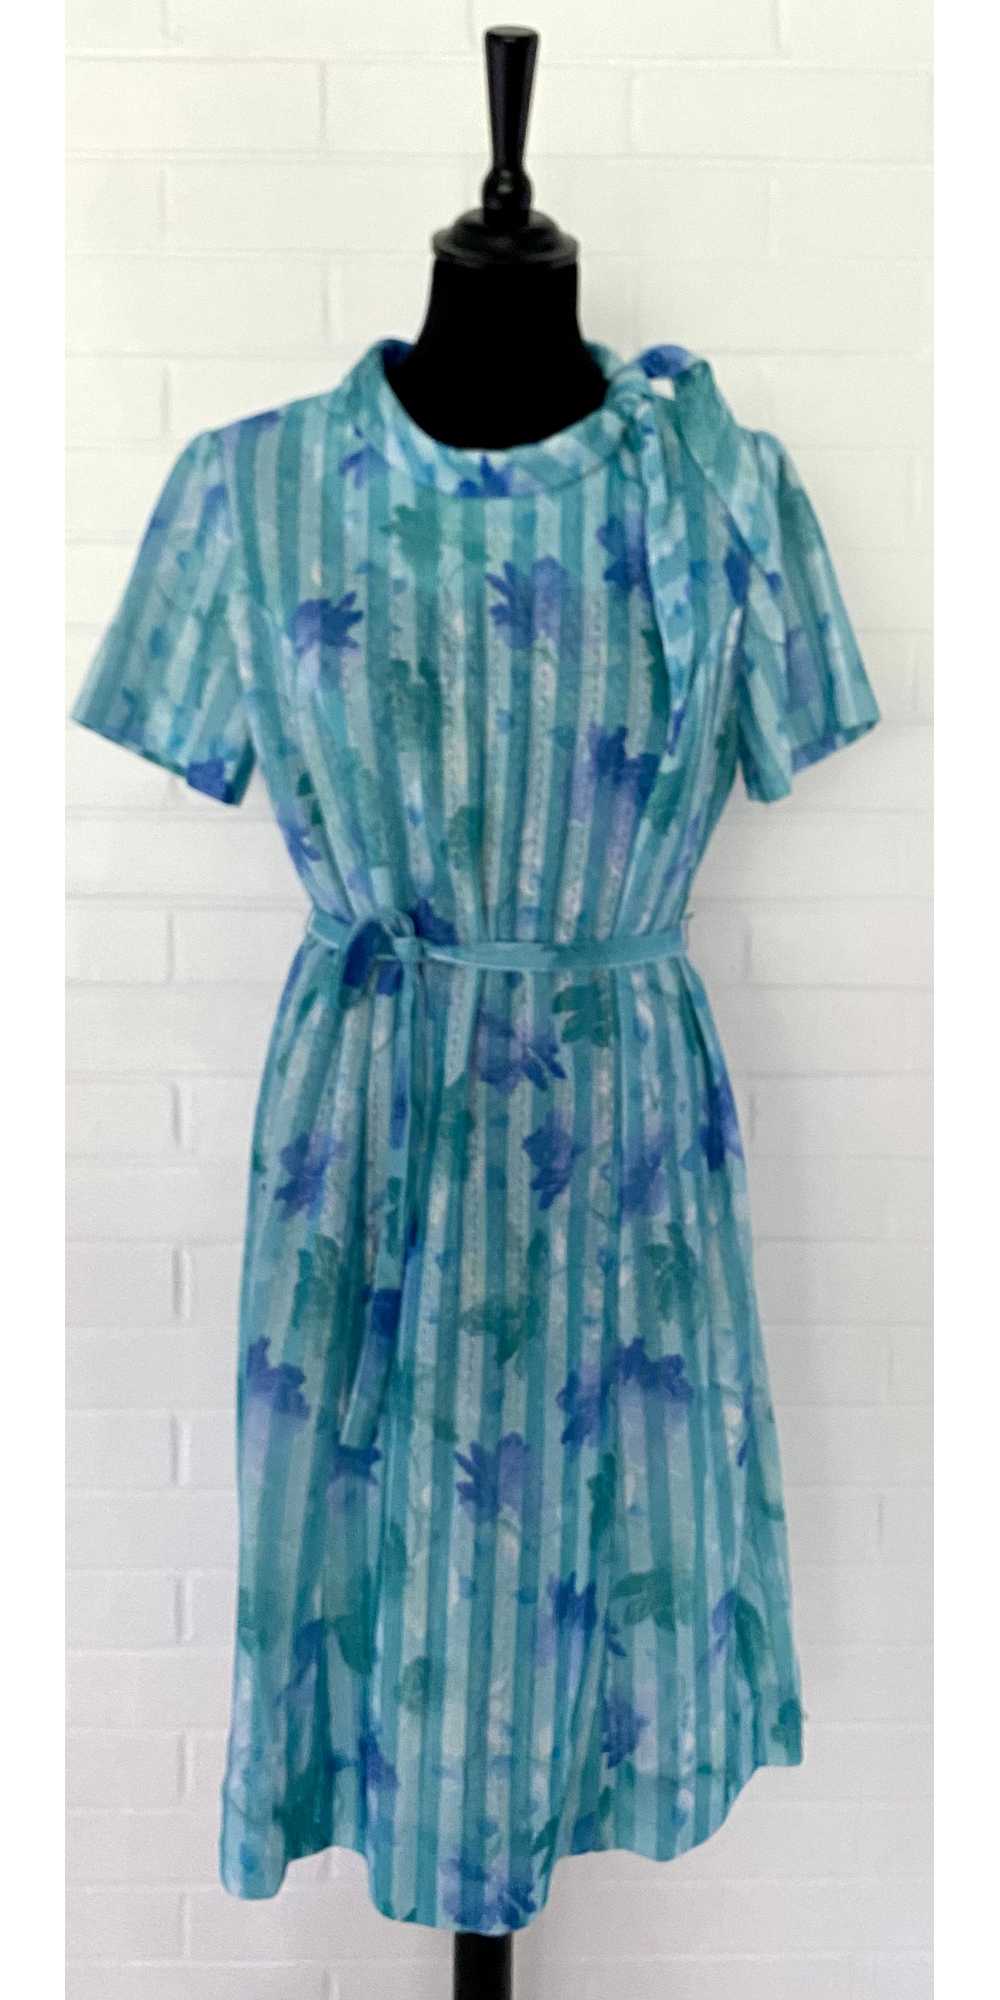 Late 60s/ Early 70s Shift Dress - Gem